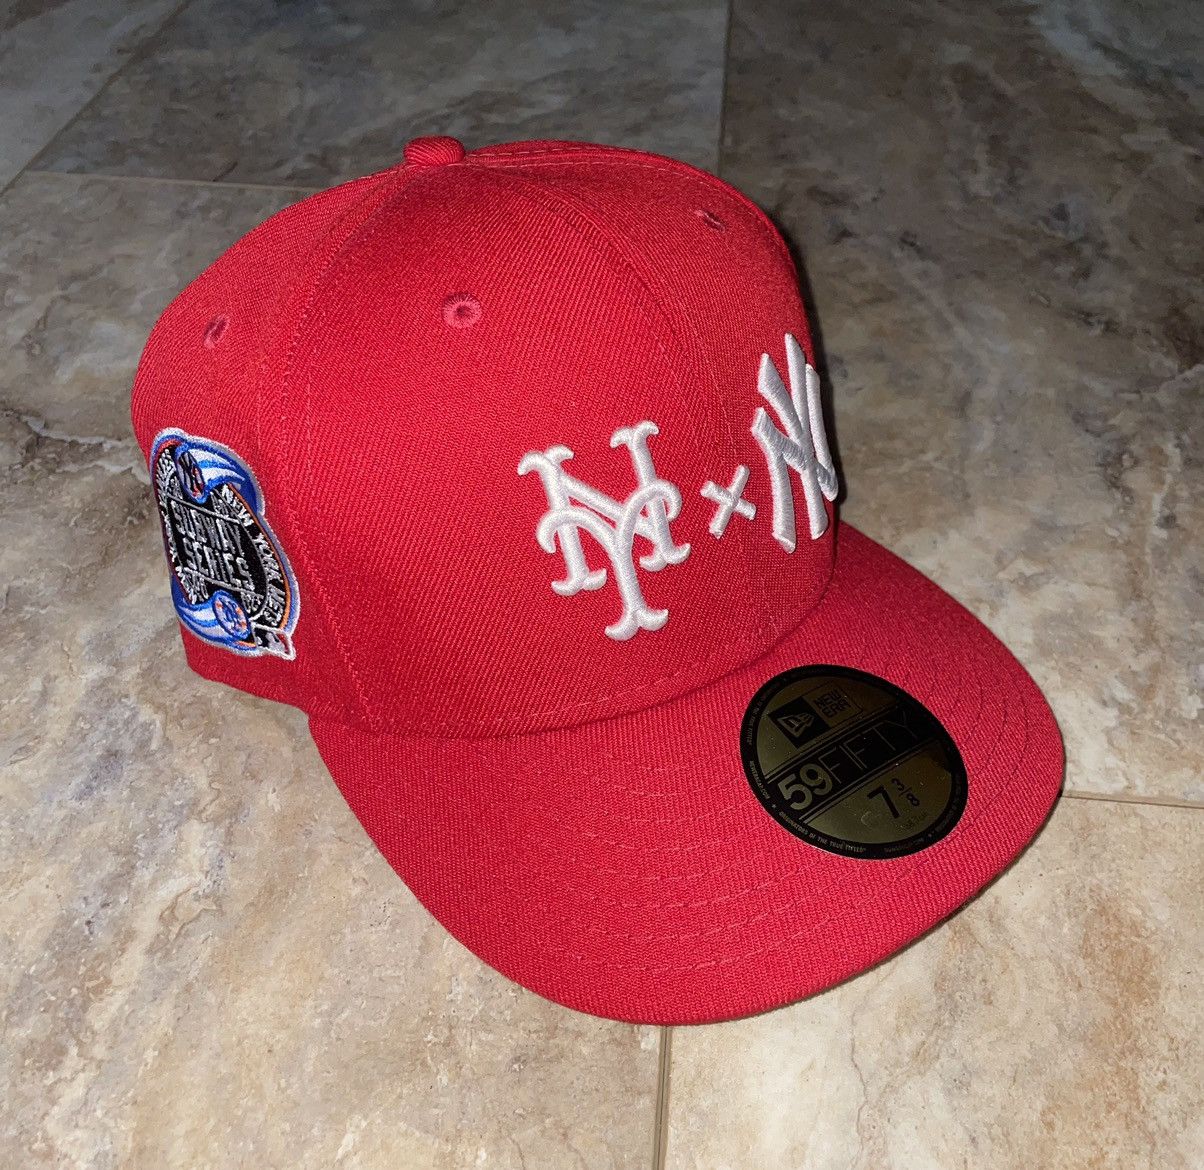 59Fifty, Accessories, Houston Astros Split Travis Scott Brown 59fifty  Fitted Mlb Hat Cap Size 7 38